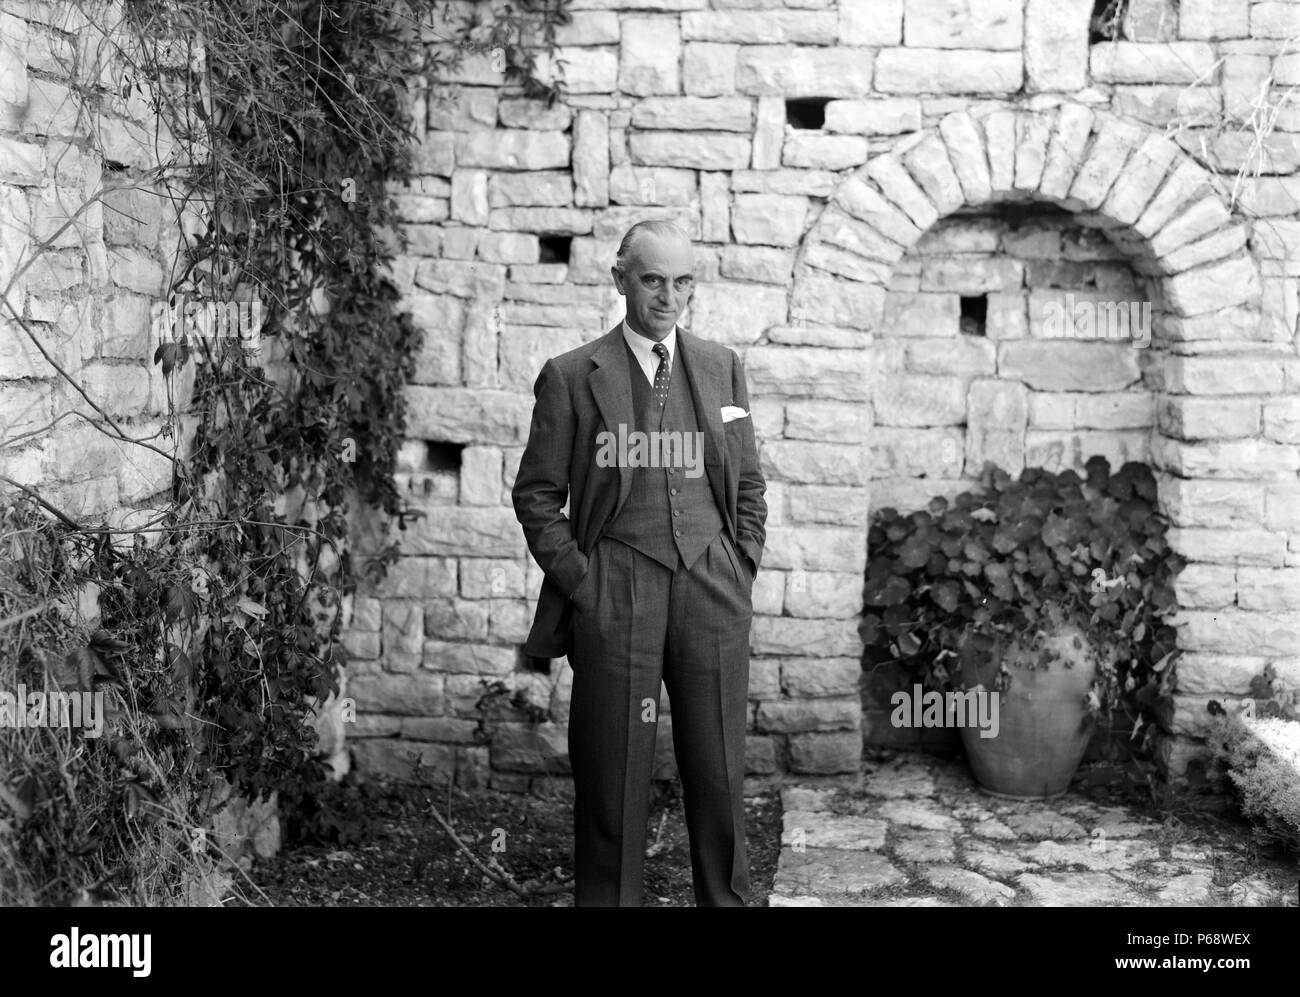 Sir Harold MacMichael, High Commissioner for Palestine at a sunken garden in his residency. MacMichael was a British colonial administrator and also served as Governor of Tanganyika. Stock Photo